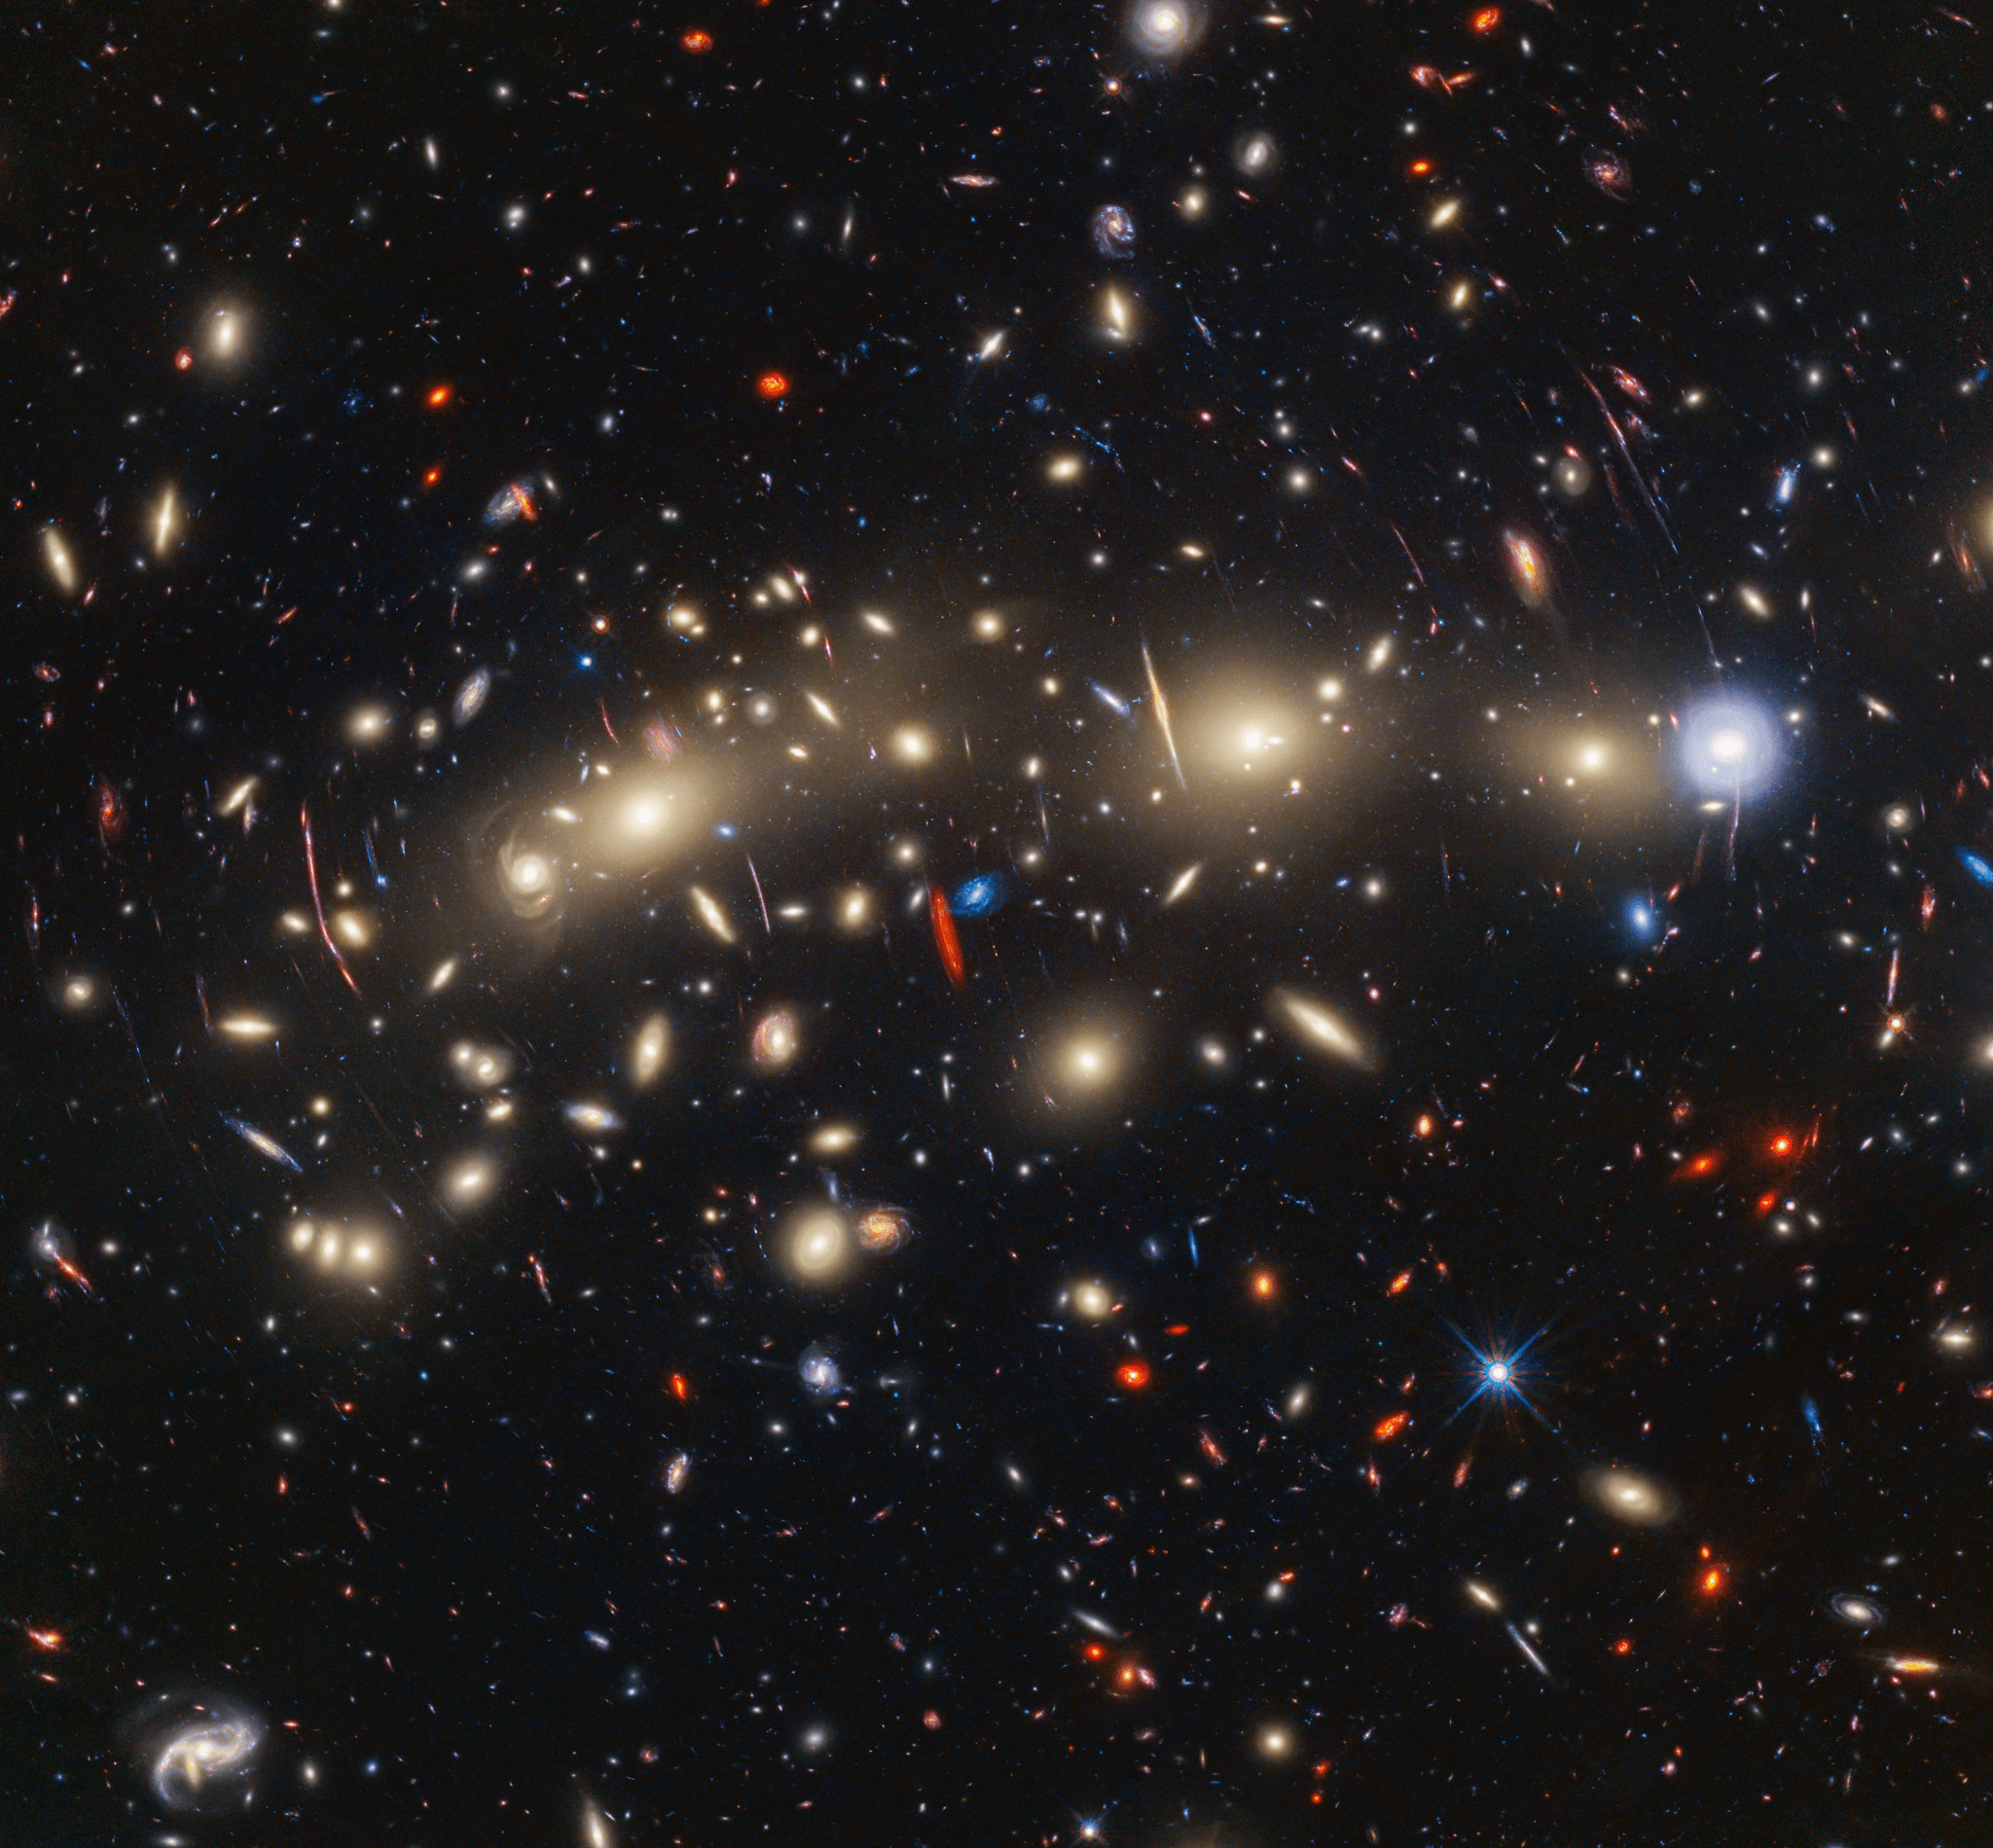 A field of galaxies on the black background of space. In the middle, stretching from left to right, is a collection of dozens of yellowish spiral and elliptical galaxies that form a foreground galaxy cluster. Among them are distorted linear features, which mostly appear to follow invisible concentric circles curving around the center of the image.